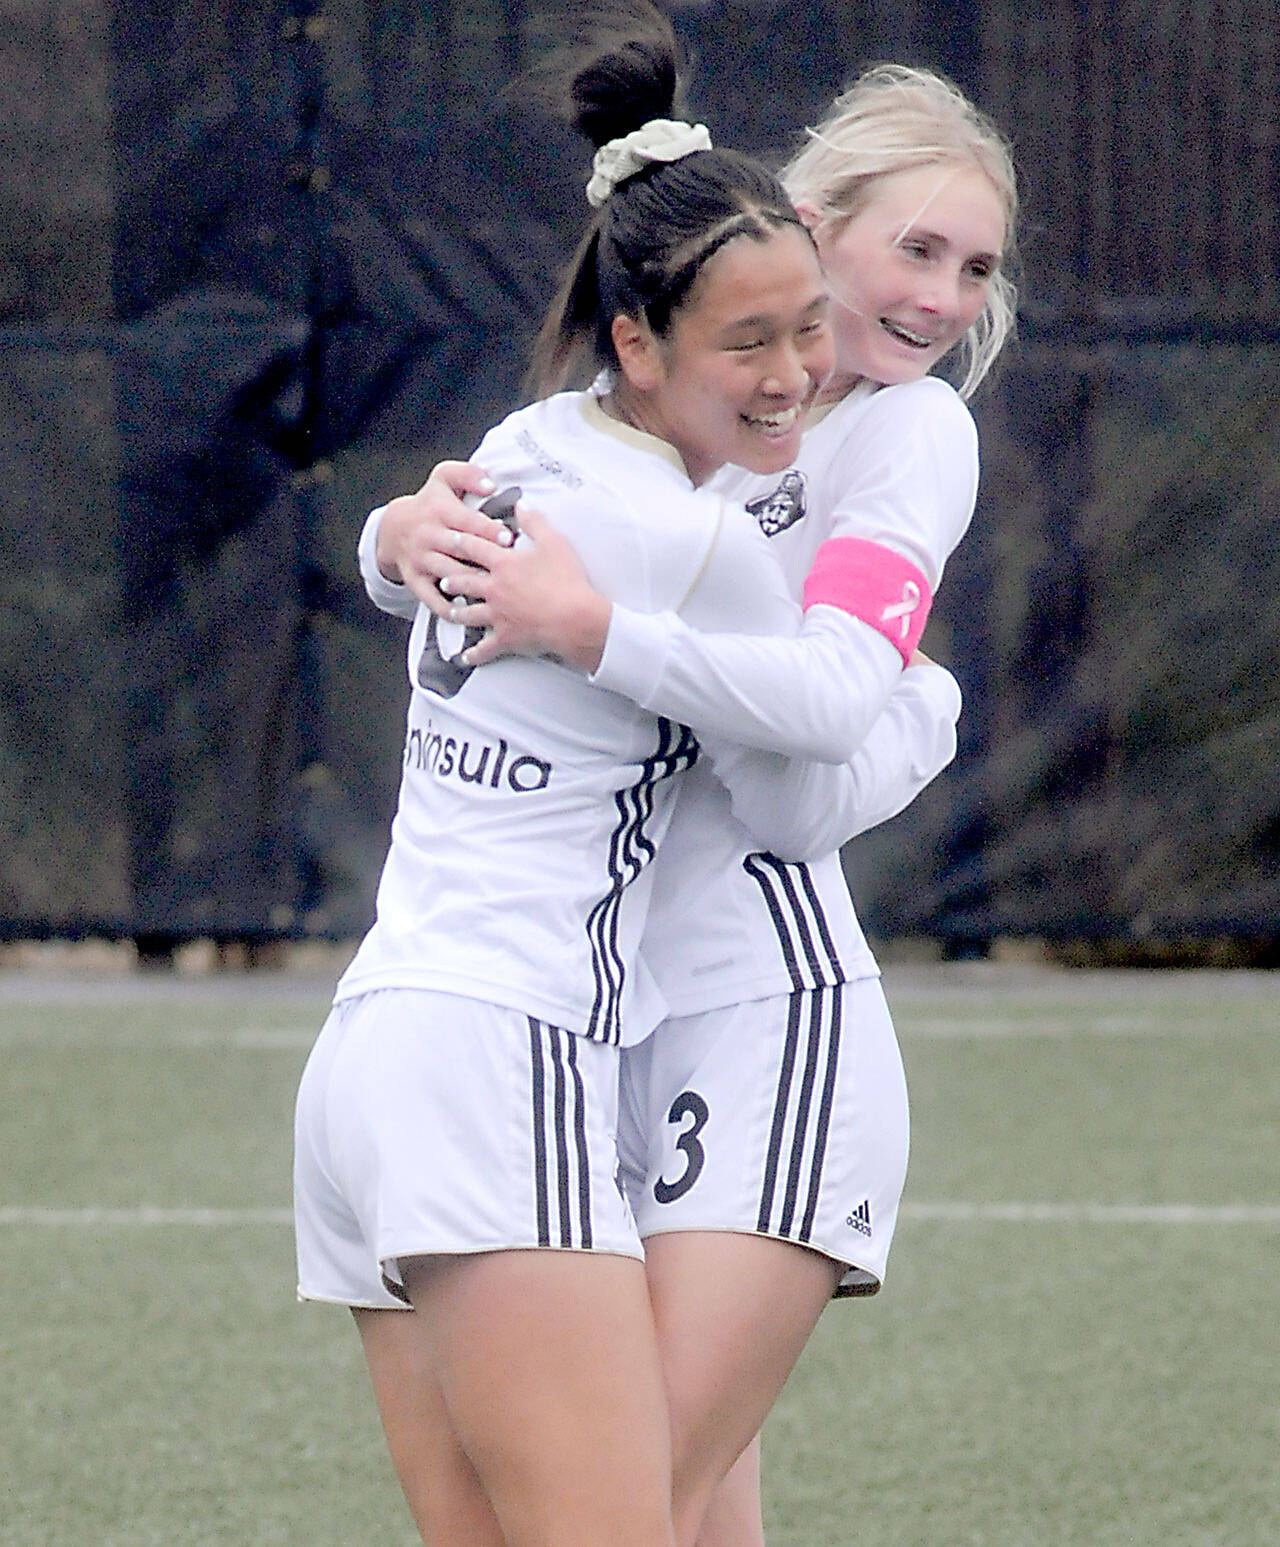 KEITH THORPE/PENINSULA DAILY NEWS Peninsula's Chiaki Takase (right) celebrates a goal with teammate Millie Long, who scored two goals earlier against Bellevue at Peninsula College on Wednesday.